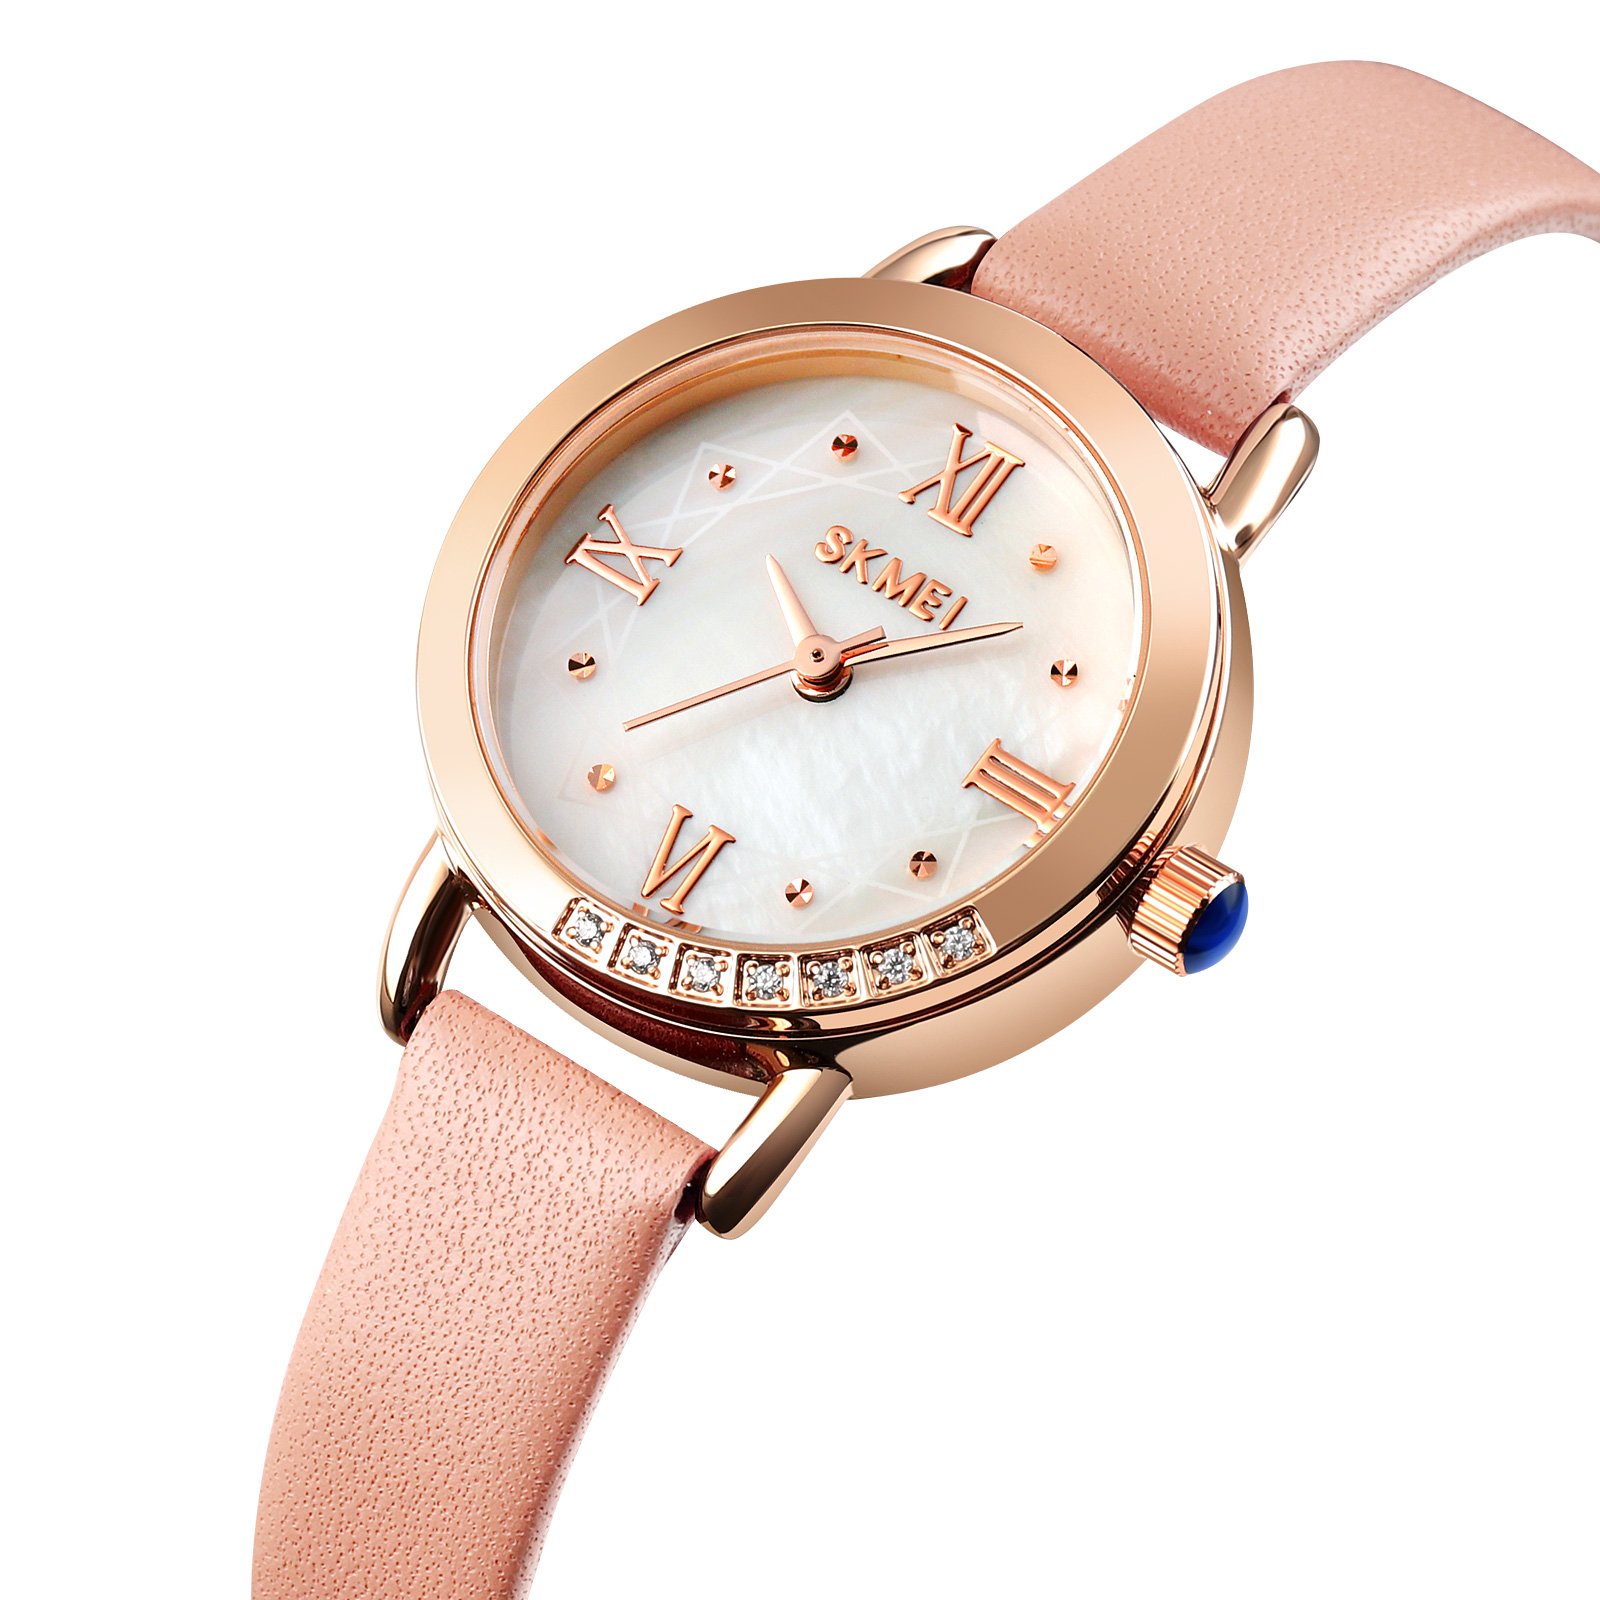 SKMEI 1769 Branded Wrist Watch For Women Pink Color